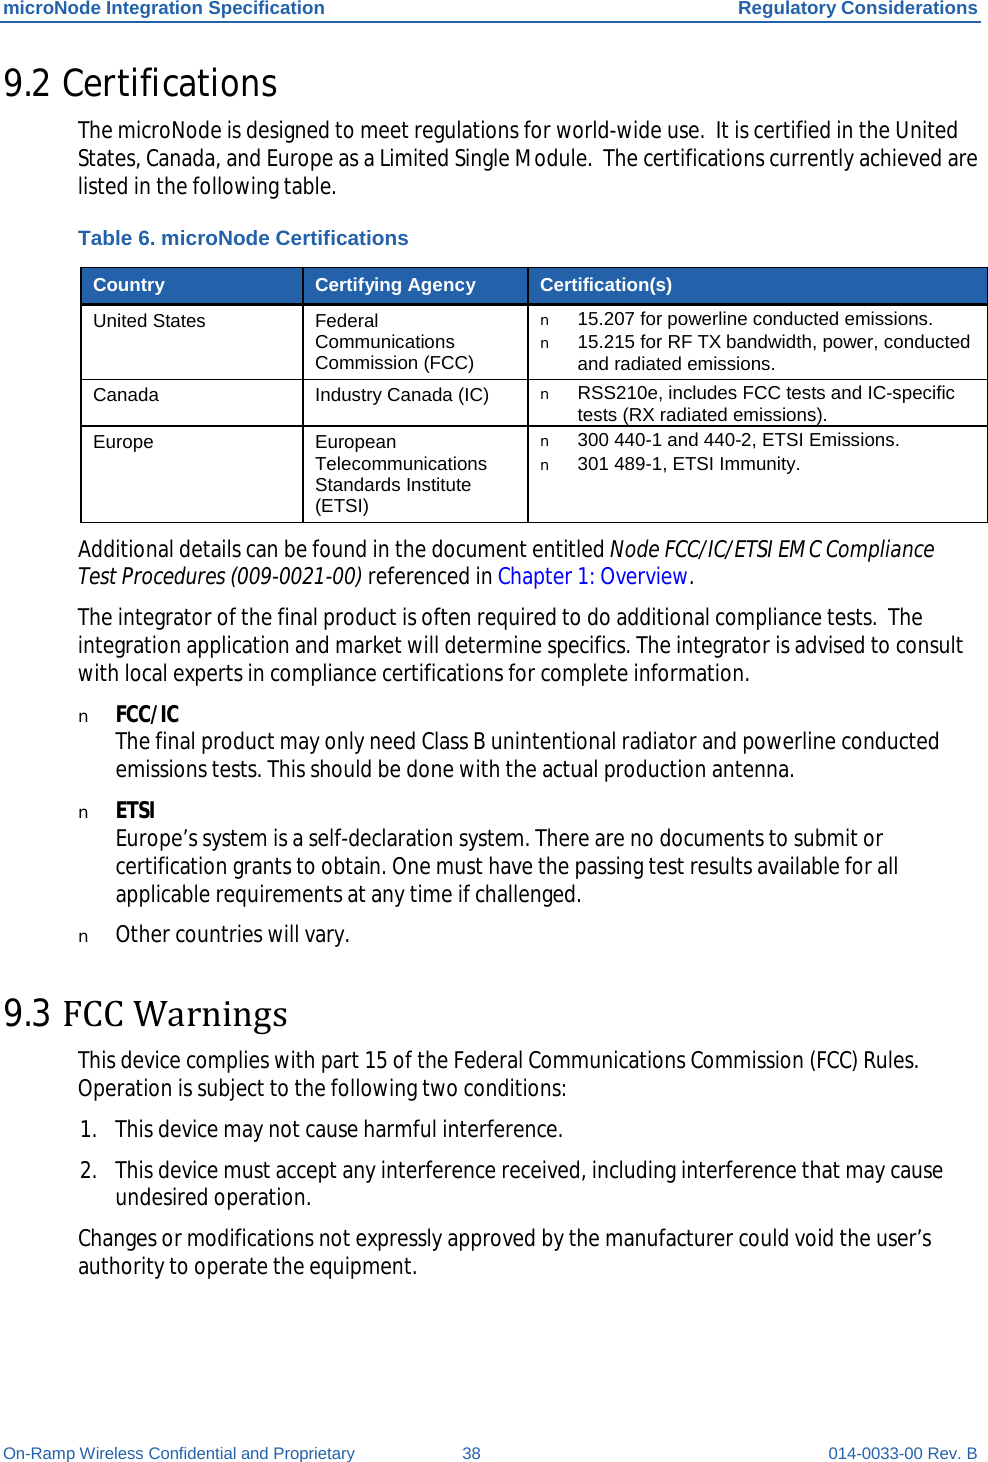 microNode Integration Specification Regulatory Considerations On-Ramp Wireless Confidential and Proprietary 38 014-0033-00 Rev. B 9.2 Certifications The microNode is designed to meet regulations for world-wide use.  It is certified in the United States, Canada, and Europe as a Limited Single Module.  The certifications currently achieved are listed in the following table. Table 6. microNode Certifications Country Certifying Agency Certification(s) United States Federal Communications Commission (FCC) n 15.207 for powerline conducted emissions. n 15.215 for RF TX bandwidth, power, conducted and radiated emissions. Canada Industry Canada (IC) n RSS210e, includes FCC tests and IC-specific tests (RX radiated emissions). Europe European Telecommunications Standards Institute (ETSI) n 300 440-1 and 440-2, ETSI Emissions. n 301 489-1, ETSI Immunity. Additional details can be found in the document entitled Node FCC/IC/ETSI EMC Compliance Test Procedures (009-0021-00) referenced in Chapter 1: Overview. The integrator of the final product is often required to do additional compliance tests.  The integration application and market will determine specifics. The integrator is advised to consult with local experts in compliance certifications for complete information. n FCC/IC The final product may only need Class B unintentional radiator and powerline conducted emissions tests. This should be done with the actual production antenna. n ETSI Europe’s system is a self-declaration system. There are no documents to submit or certification grants to obtain. One must have the passing test results available for all applicable requirements at any time if challenged. n Other countries will vary. 9.3 FCC Warnings This device complies with part 15 of the Federal Communications Commission (FCC) Rules. Operation is subject to the following two conditions:  1. This device may not cause harmful interference. 2. This device must accept any interference received, including interference that may cause undesired operation. Changes or modifications not expressly approved by the manufacturer could void the user’s authority to operate the equipment. 